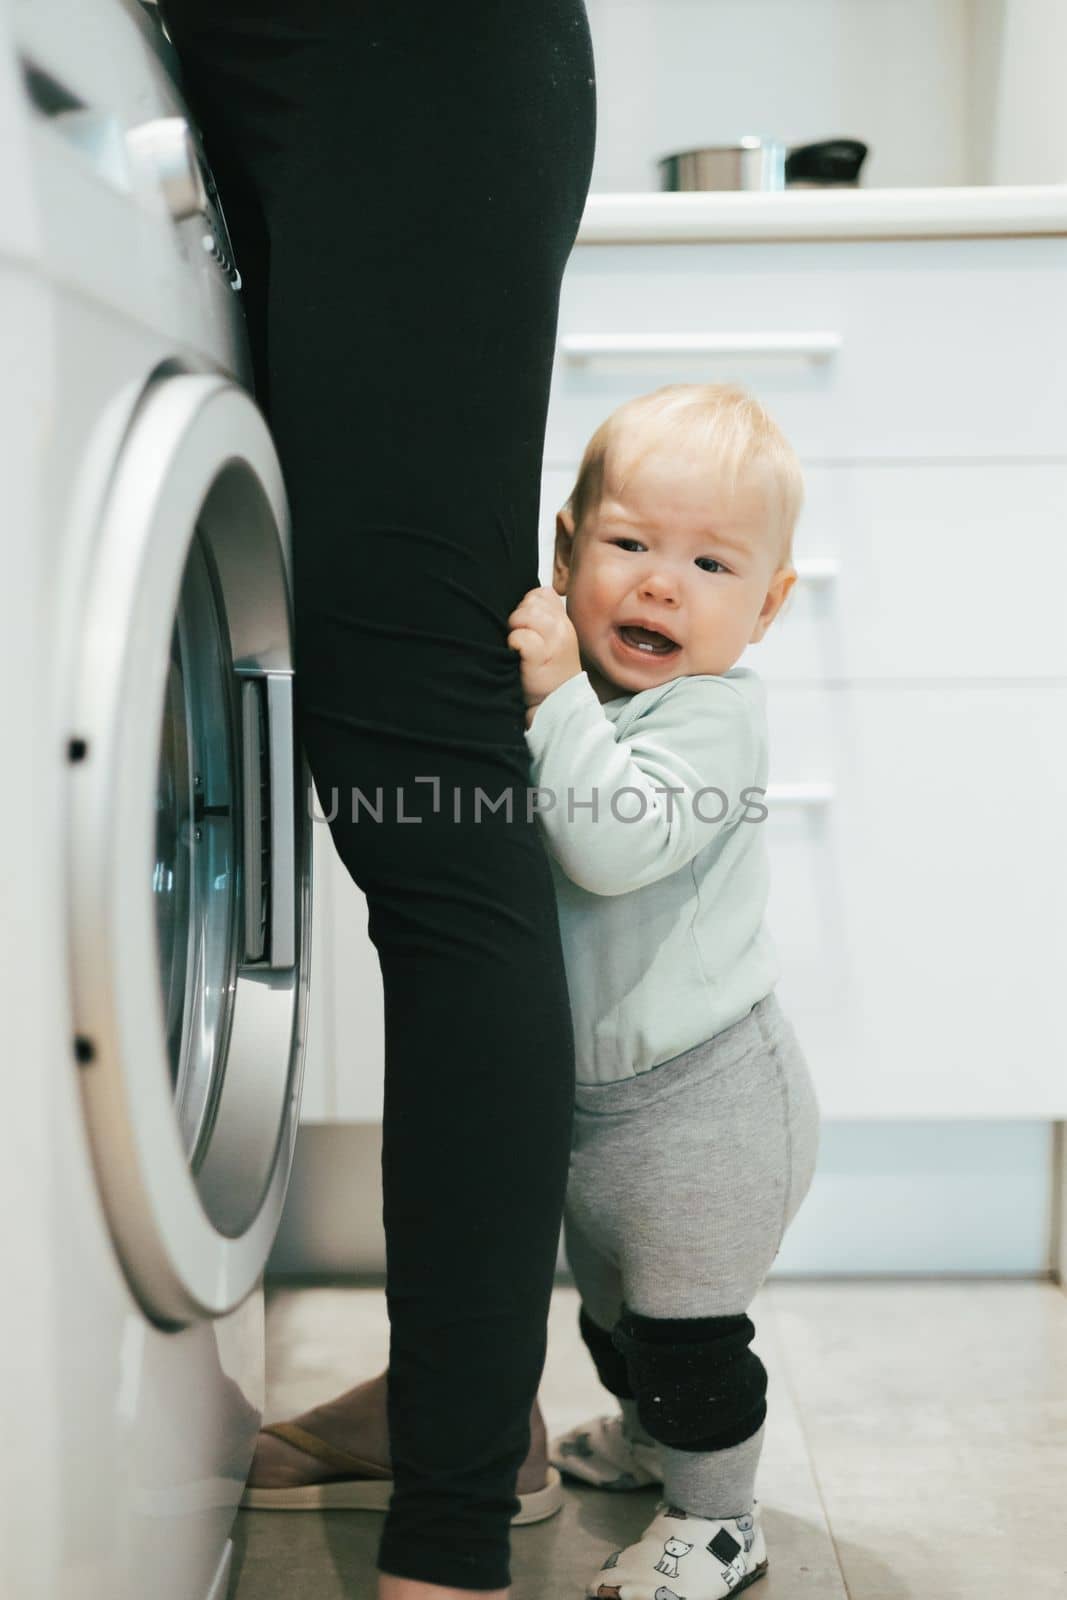 Little infant baby boy child hiding between mothers legs demanding her attention while she is multitasking, trying to do some household chores in kitchen at home. Mother on maternity leave